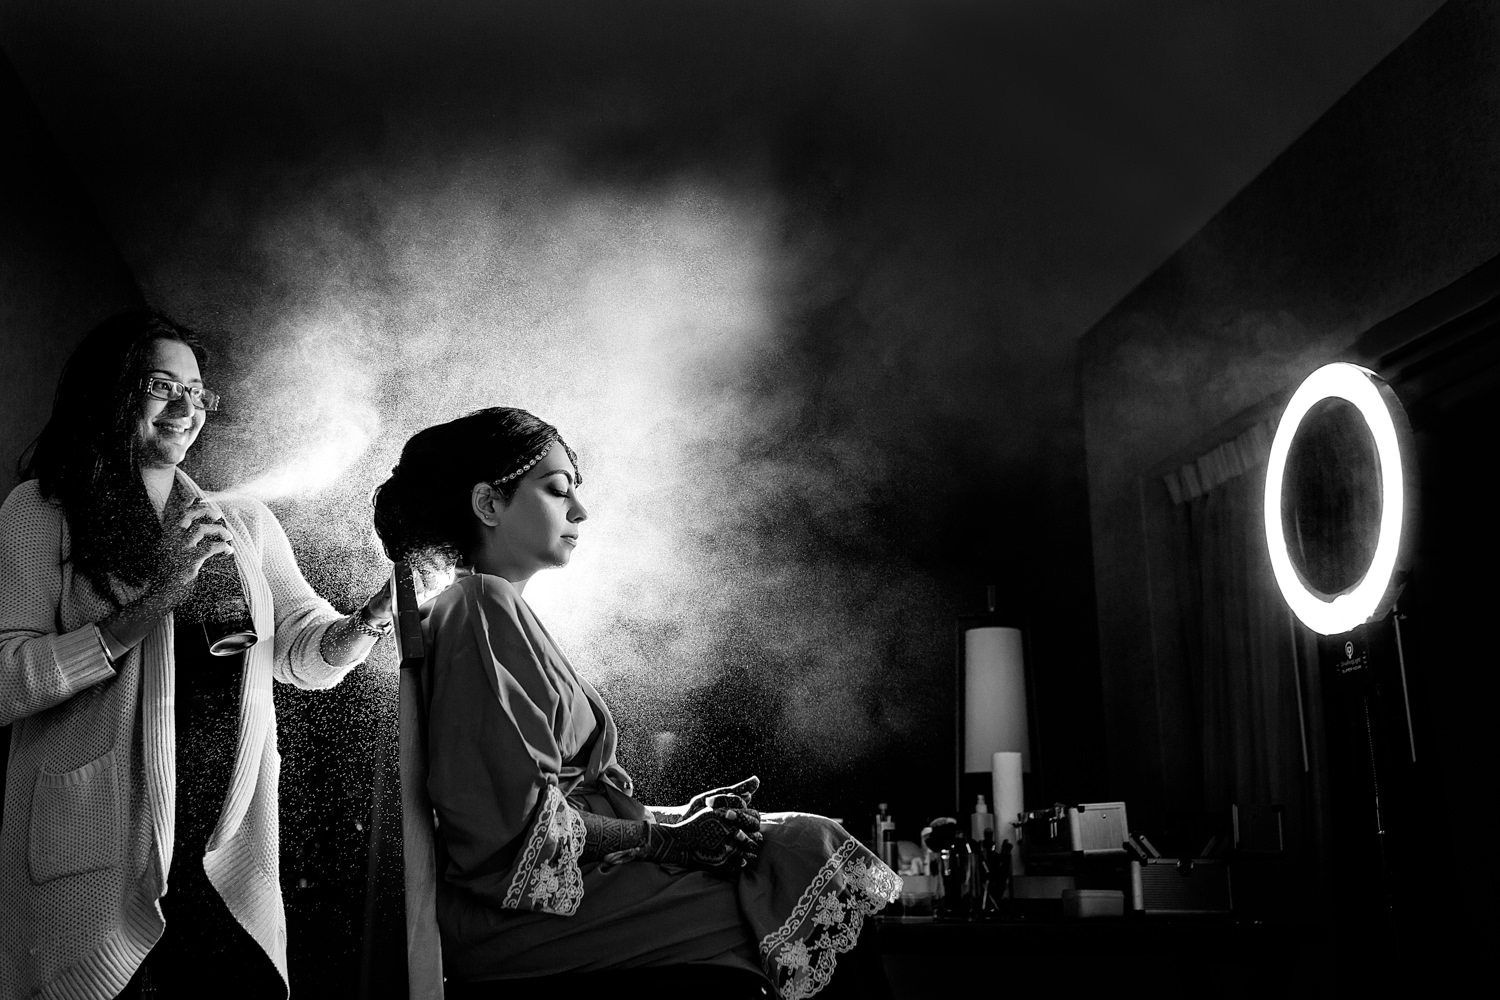 This was an Indian wedding on the Eastern Shore, Maryland, The black and white photo is of the bride getting her hair done, I took a flash and lit up the hairspray so it looks like a bright cloud of smoke illuminating behind the bride's head, We work hard to make your wedding images unique and bold, Procopio Photography, best top Washington DC photographer, best top Maryland photographer, best top Virginia photographer, best top DMV photographer, best top wedding photographer, best top commercial photographer, best top portrait photographer, best top boudoir photographer, modern fine art portraits, dramatic, unique, different, bold, editorial, photojournalism, award winning photographer, published photographer, memorable images, be different, stand out